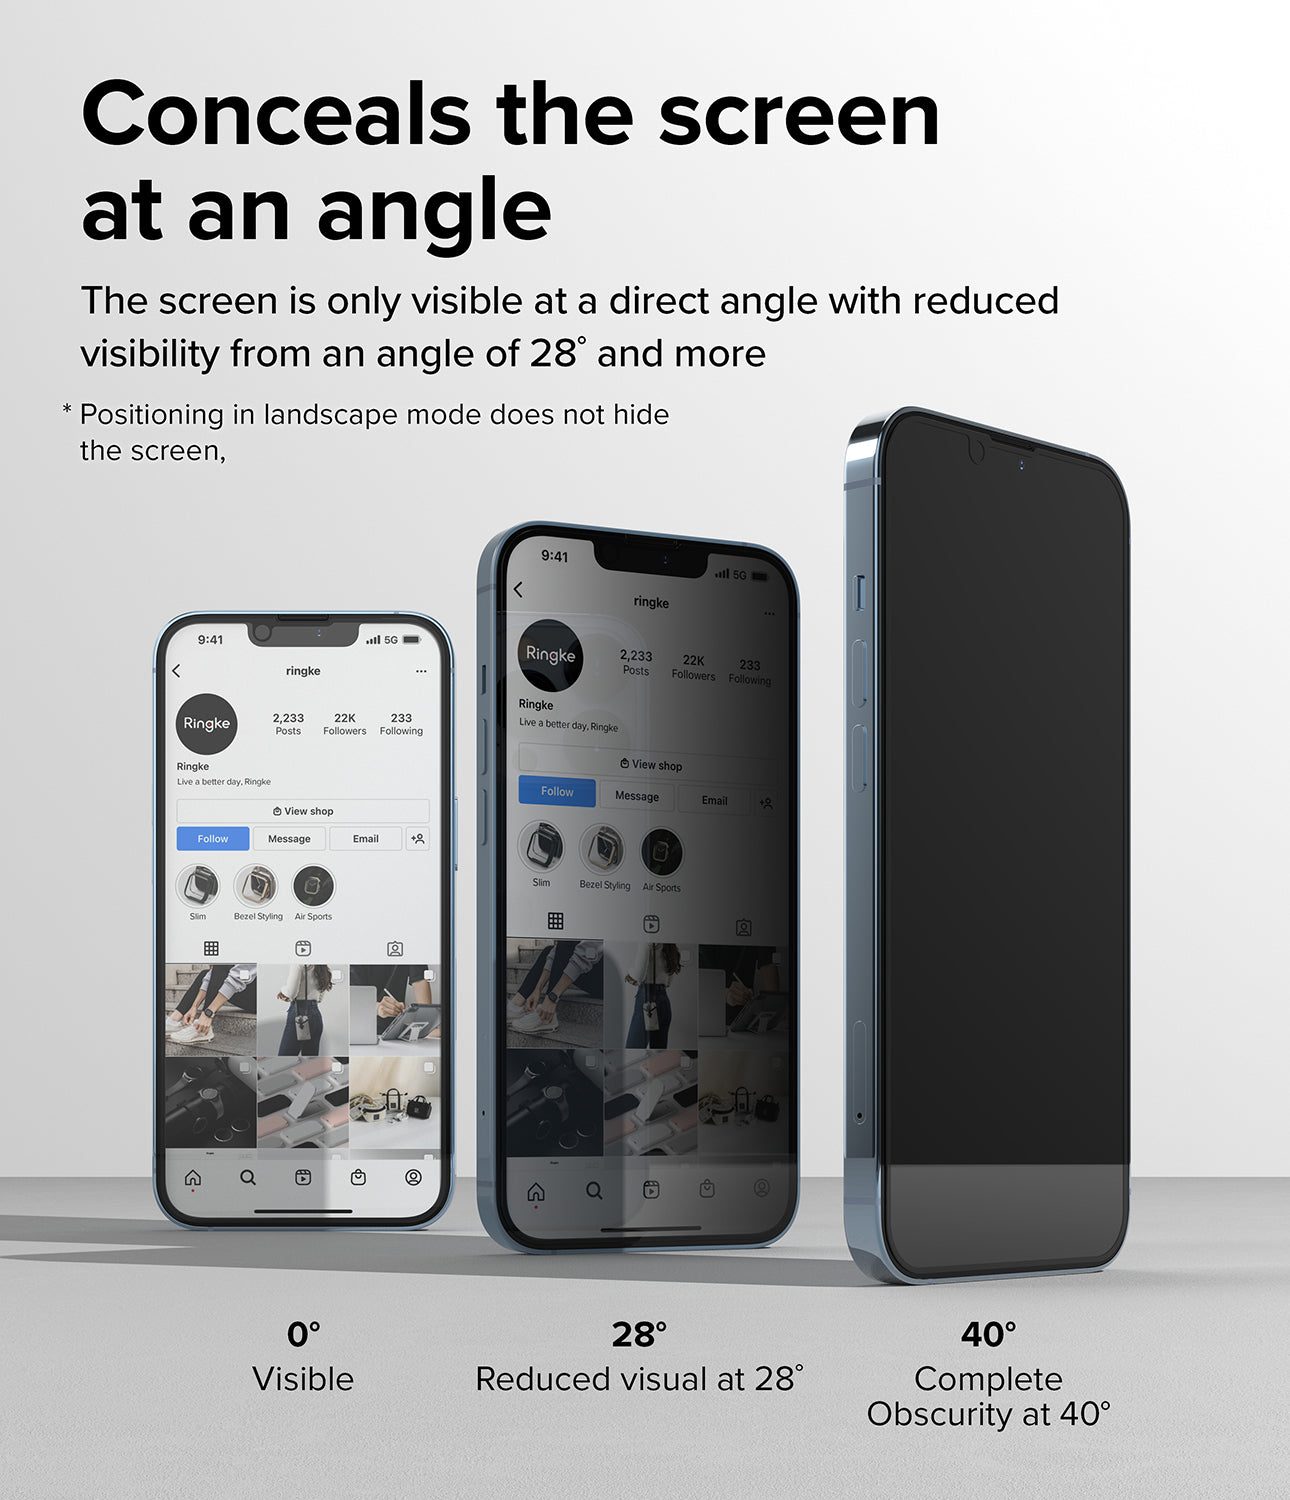 iPhone 14 / 13 Pro / 13 Screen Protector | Privacy Glass - Conceals the screen at an angle. The screen is only visible at a direct angle with reduced visibility from an angle of 28 degrees and more. Positioning in landscape mode does not hide the screen.